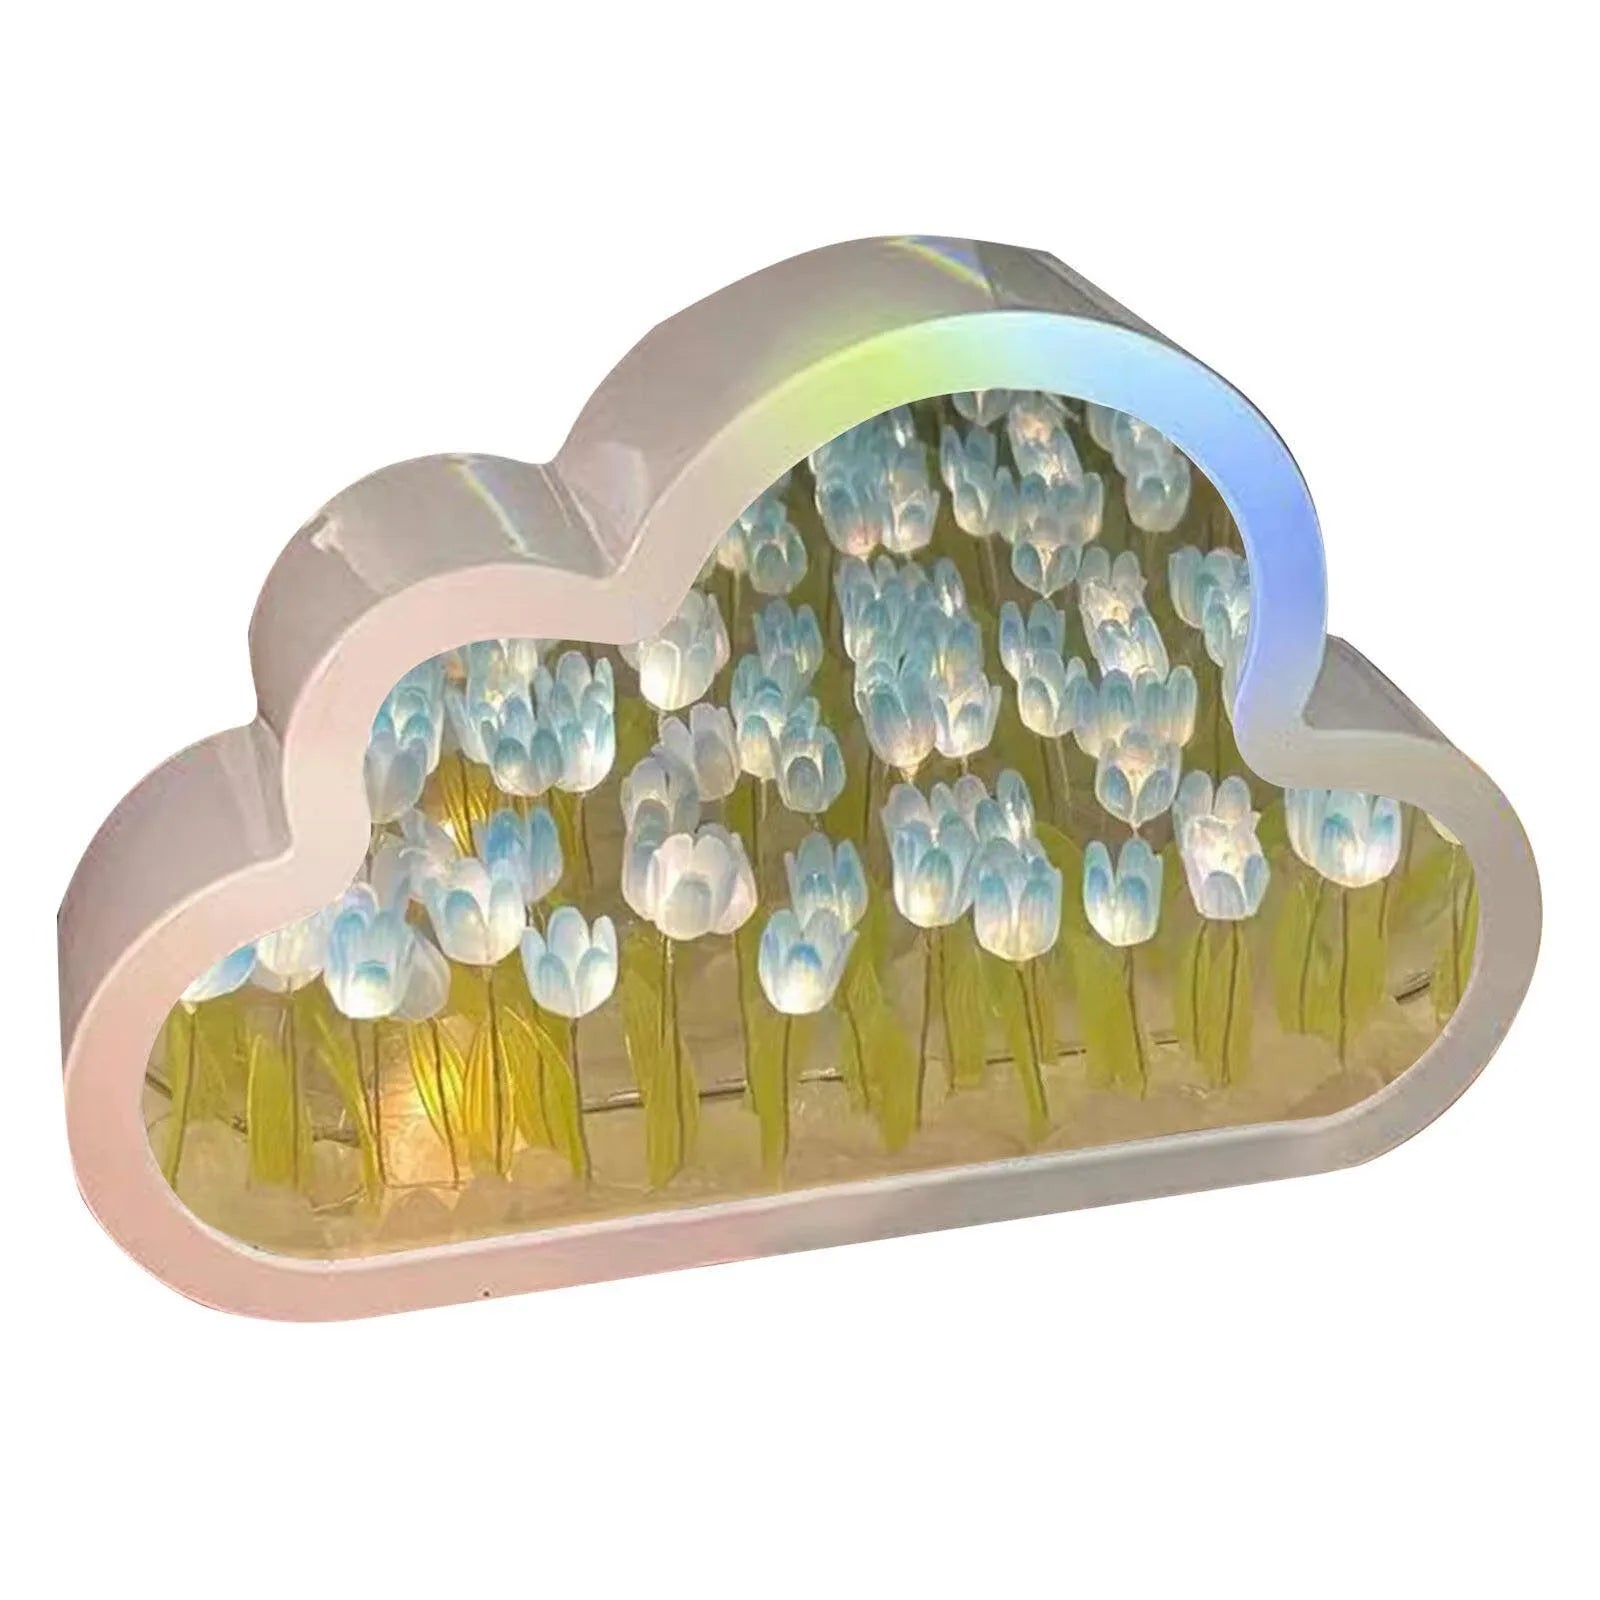 Decorative cloud-shaped LED night light with tulip-like lights cascading down, creating a whimsical and enchanting table lamp for the bedroom.